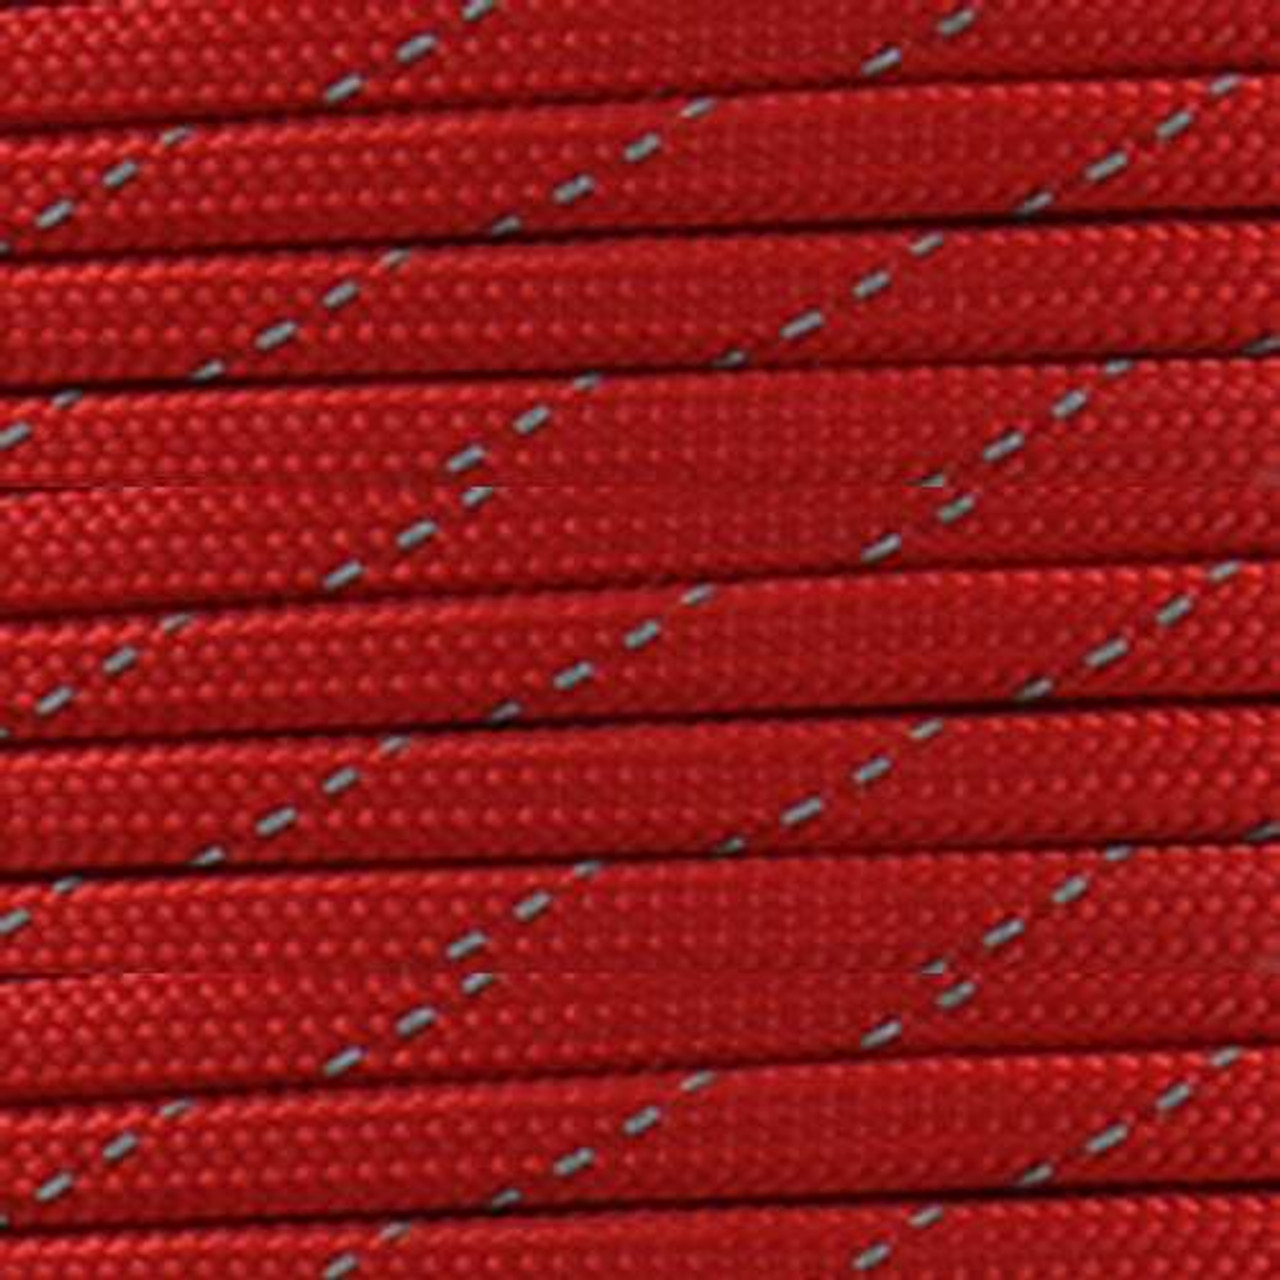 Imperial Red - 550 Paracord (Reflective) - 100ft